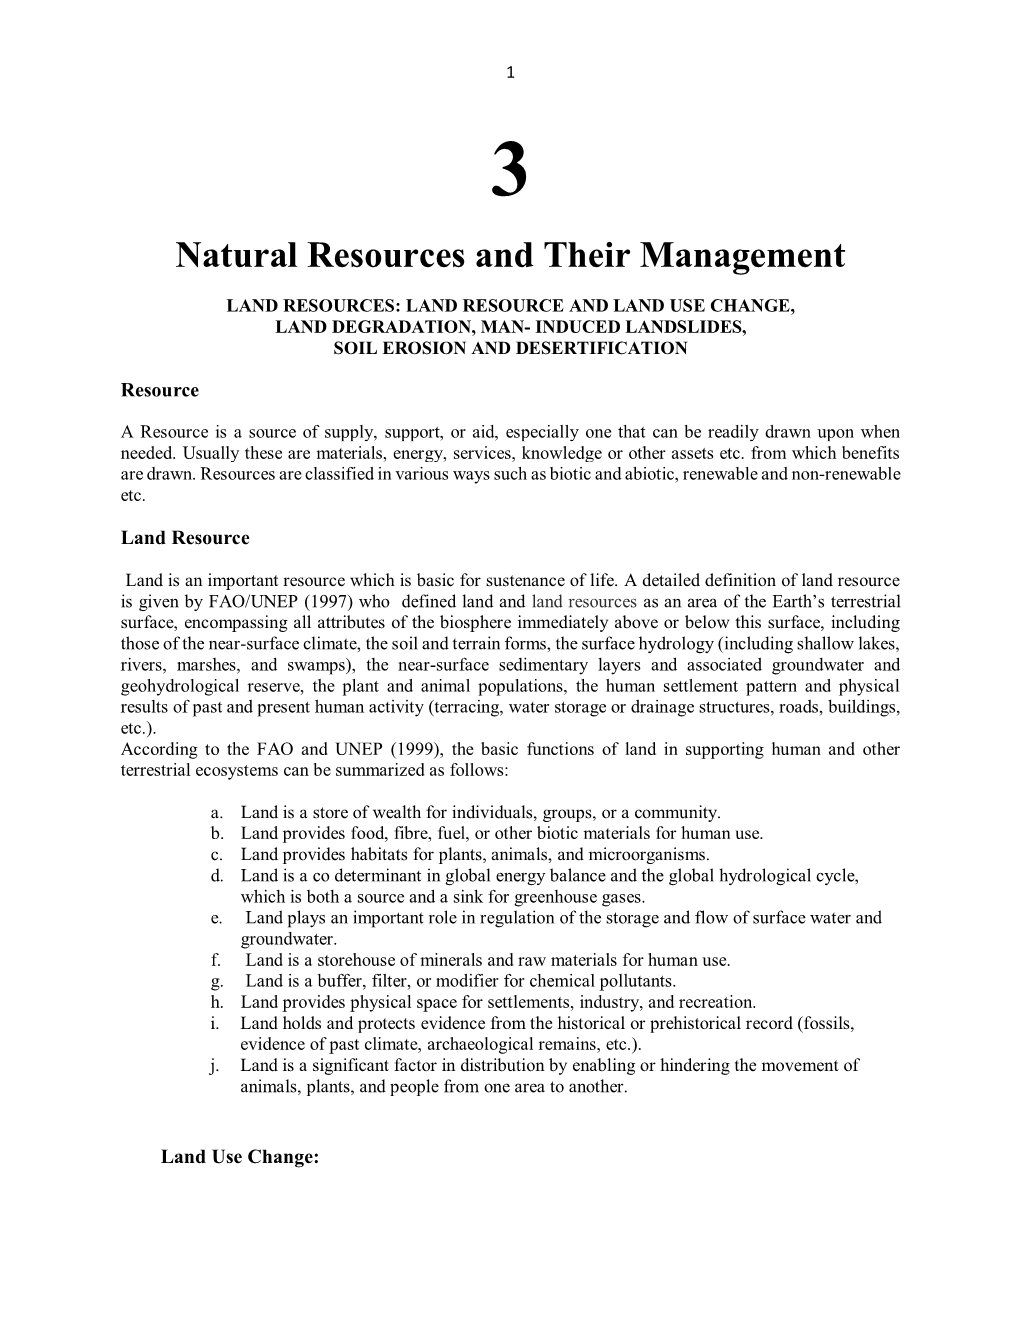 Natural Resources and Their Management